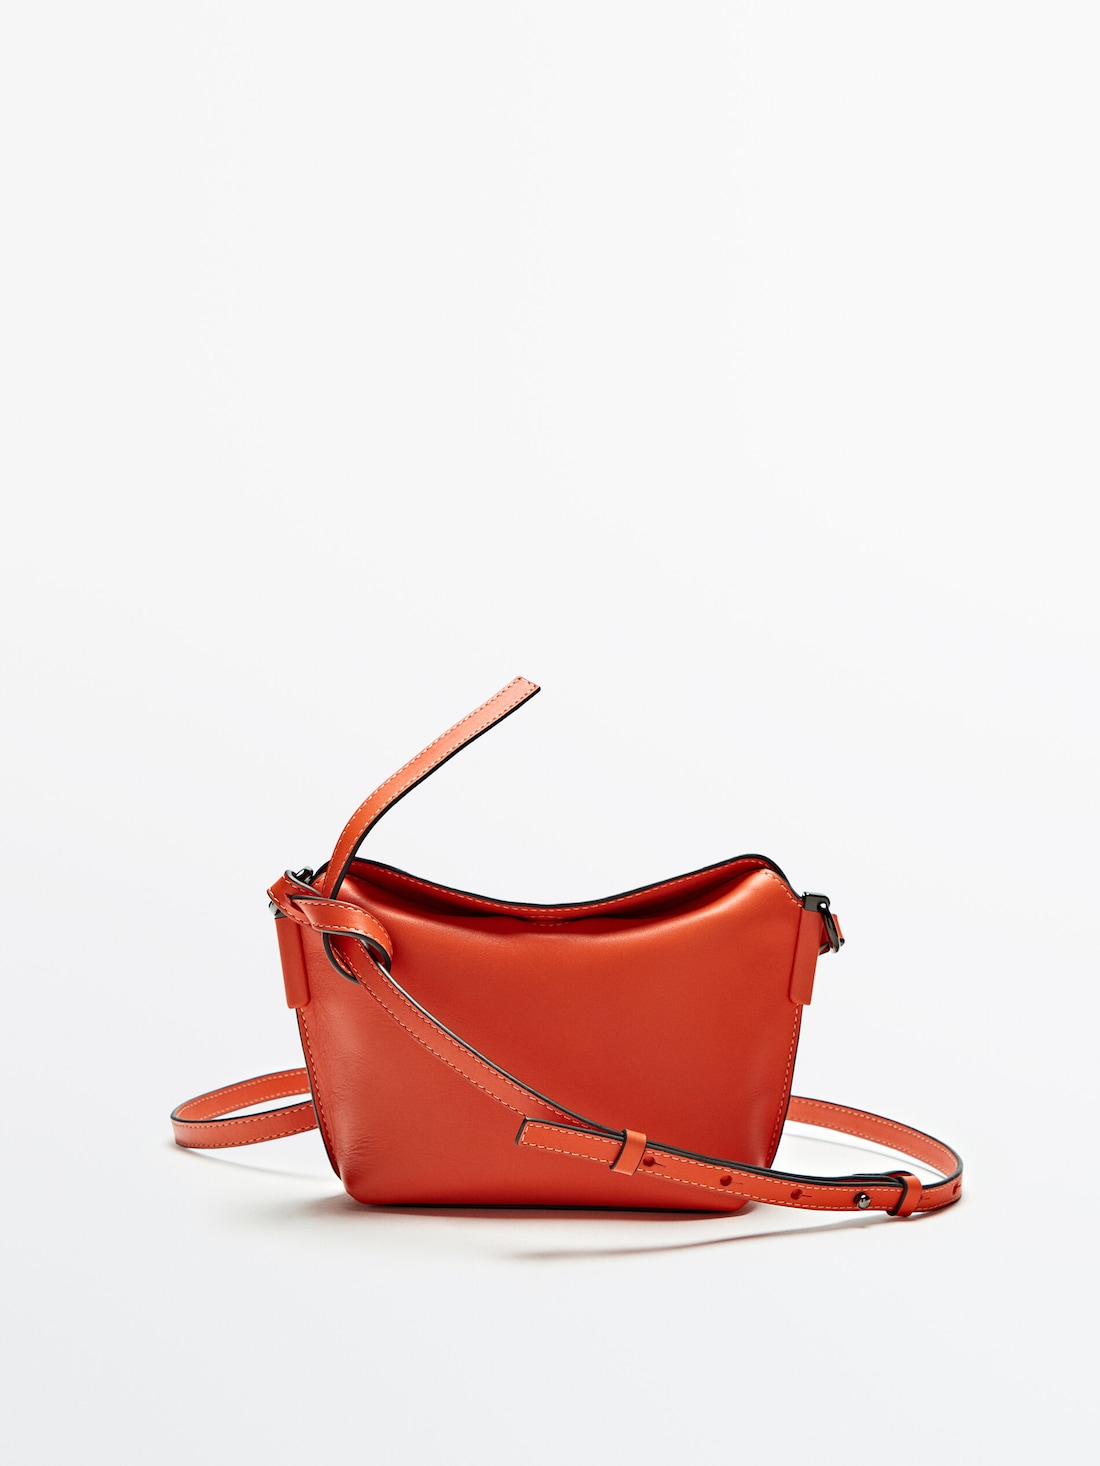 LEATHER CROSSBODY BAG WITH SEAM DETAILS